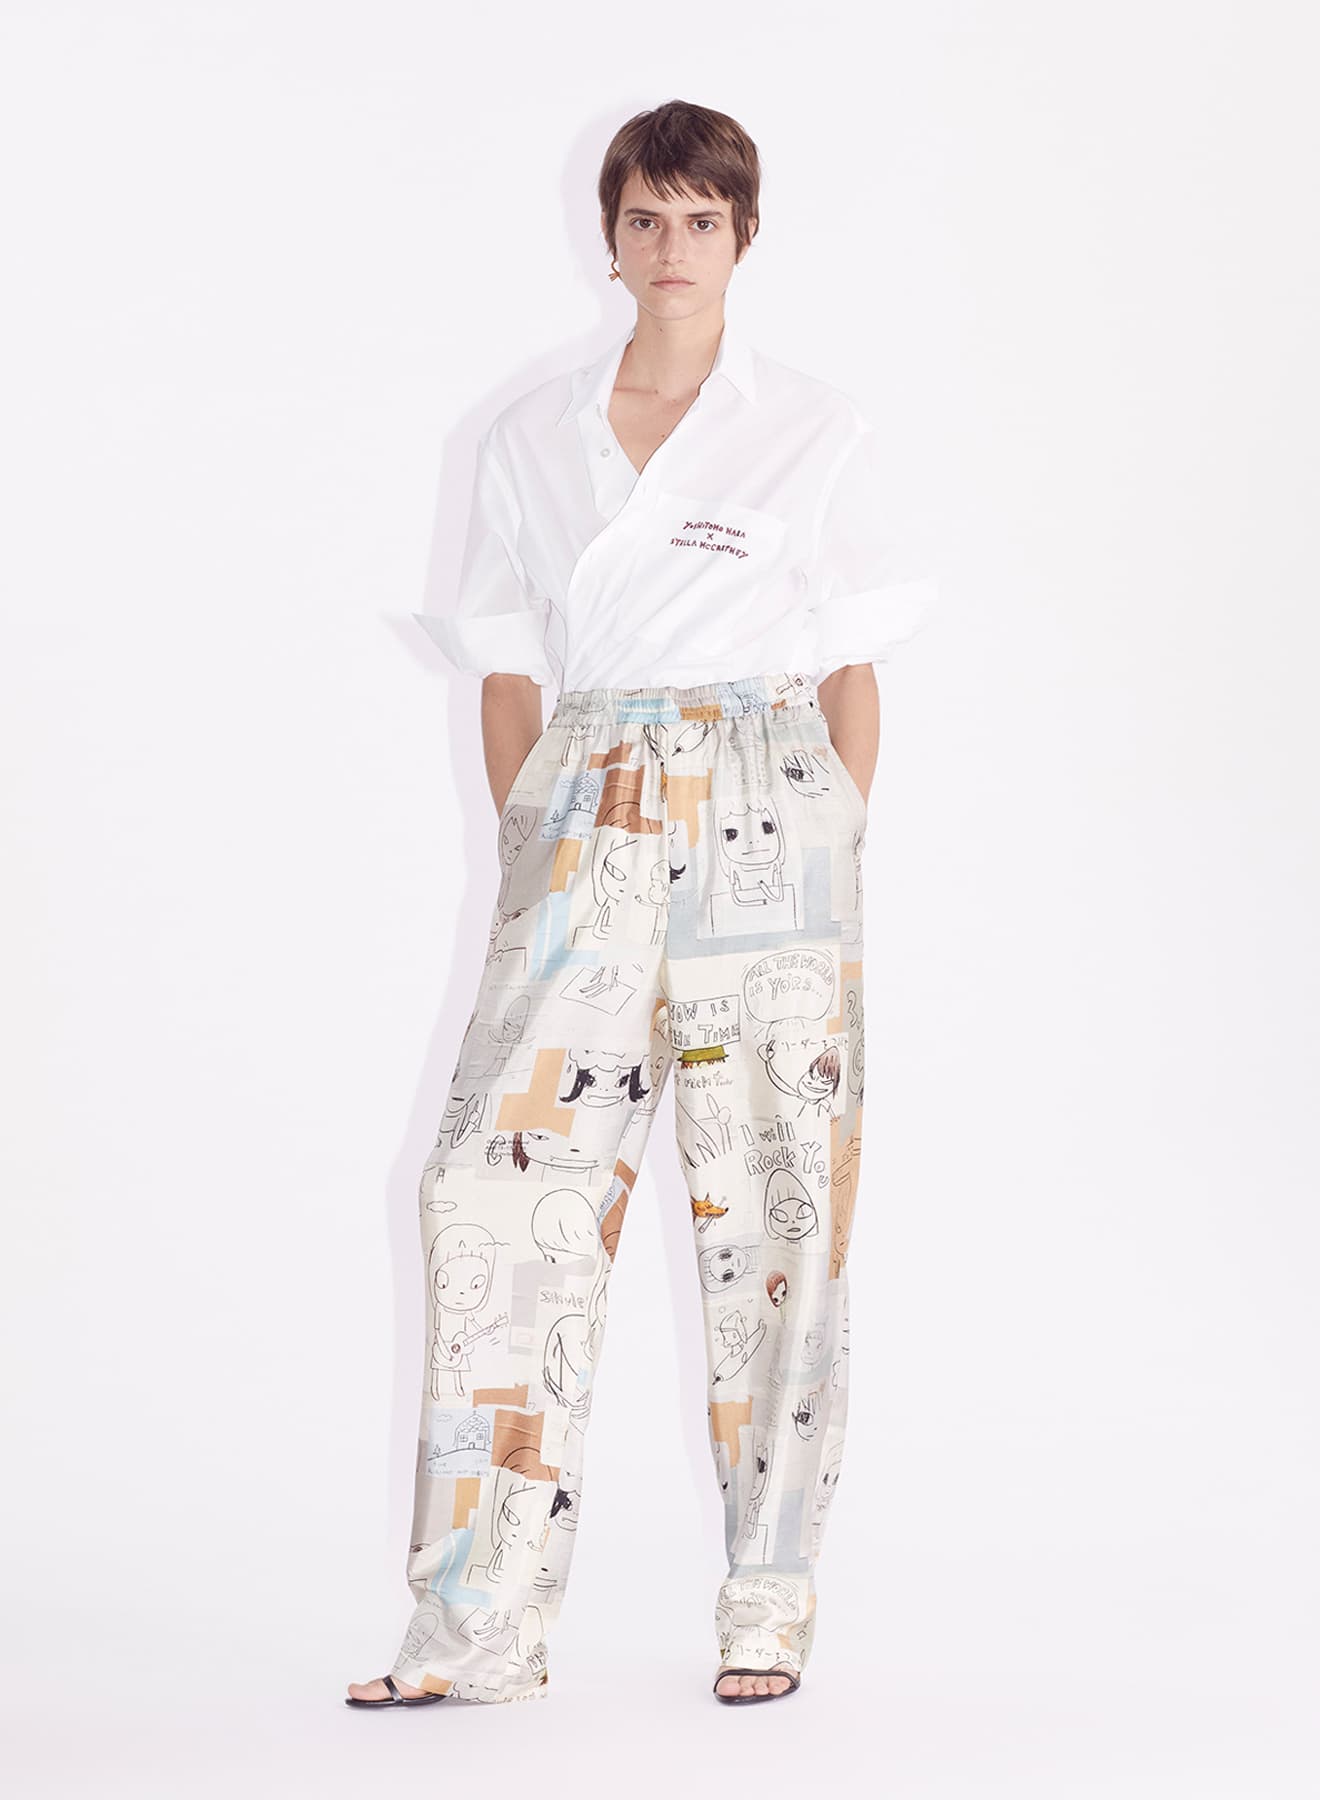 Stella McCartney Collaborates with 3 Artists for Latest Capsule Collection